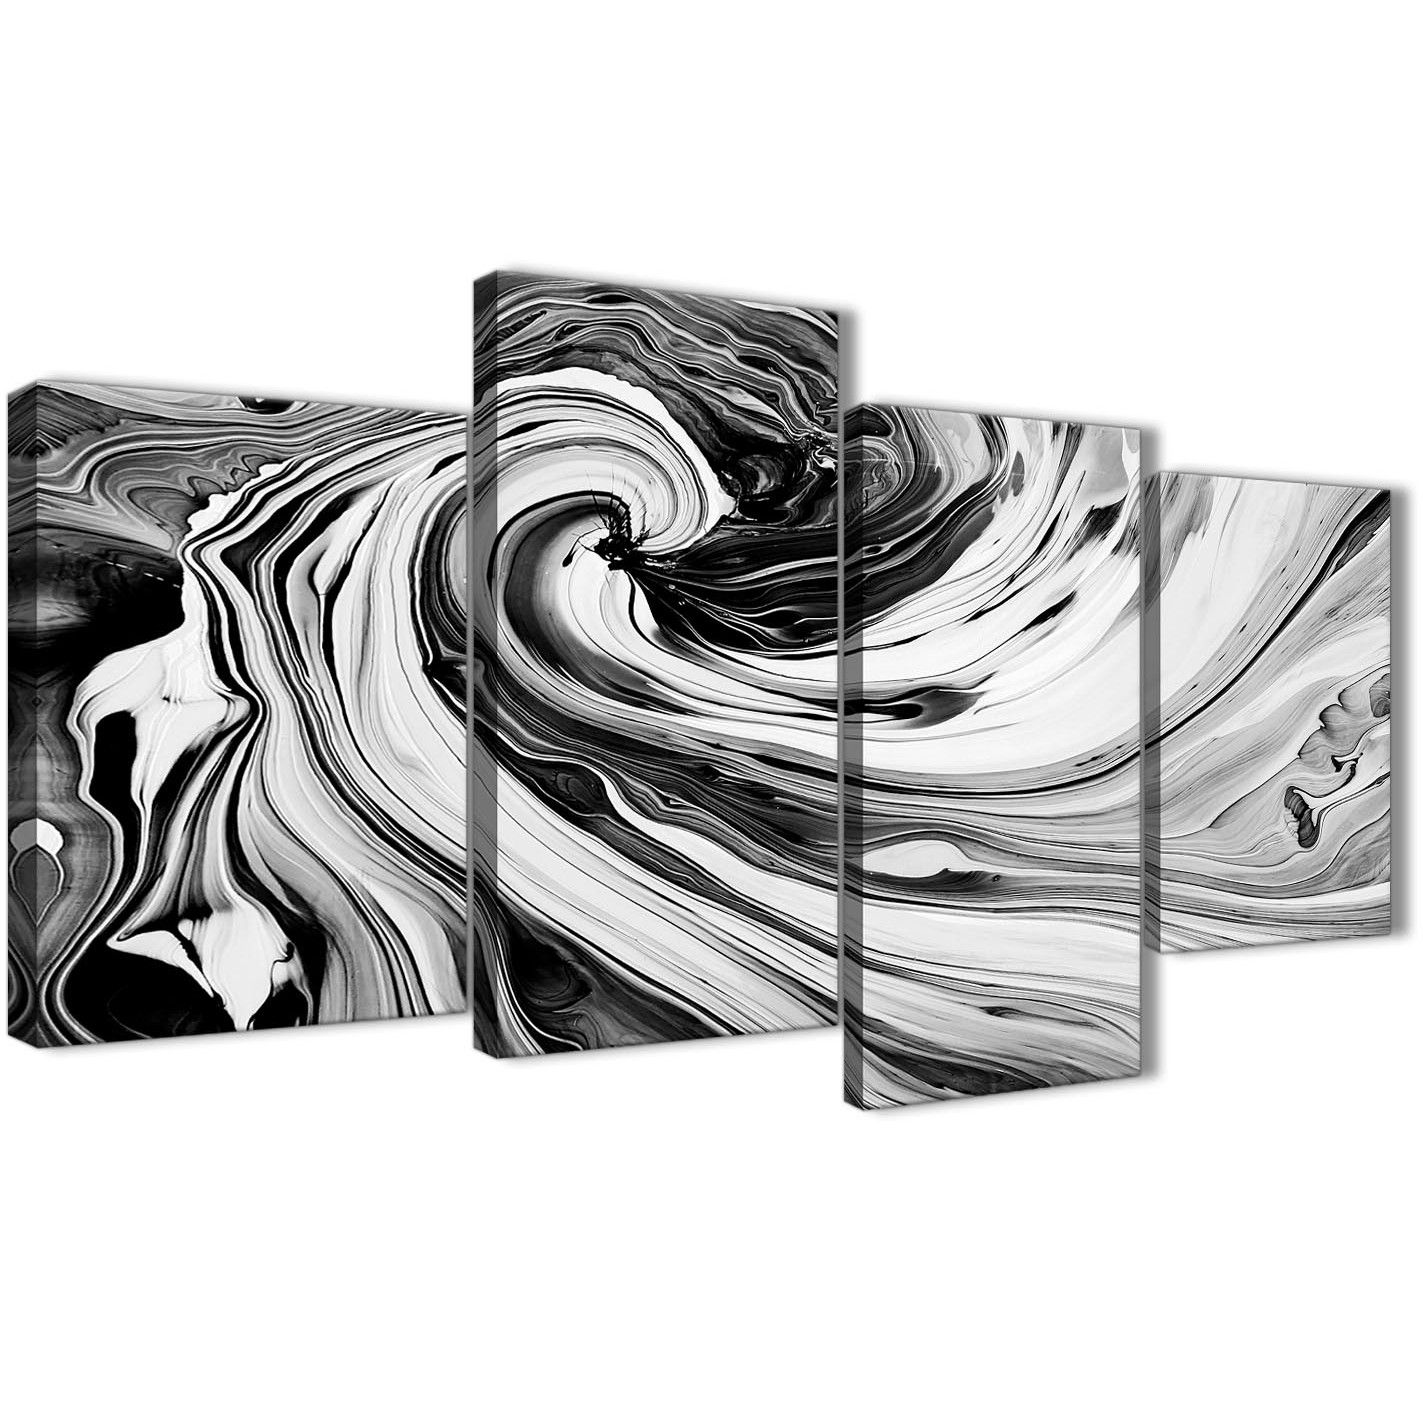 Black And White Abstract Wall Art Large Black White Grey Swirls Regarding Black And White Large Canvas Wall Art (View 13 of 20)